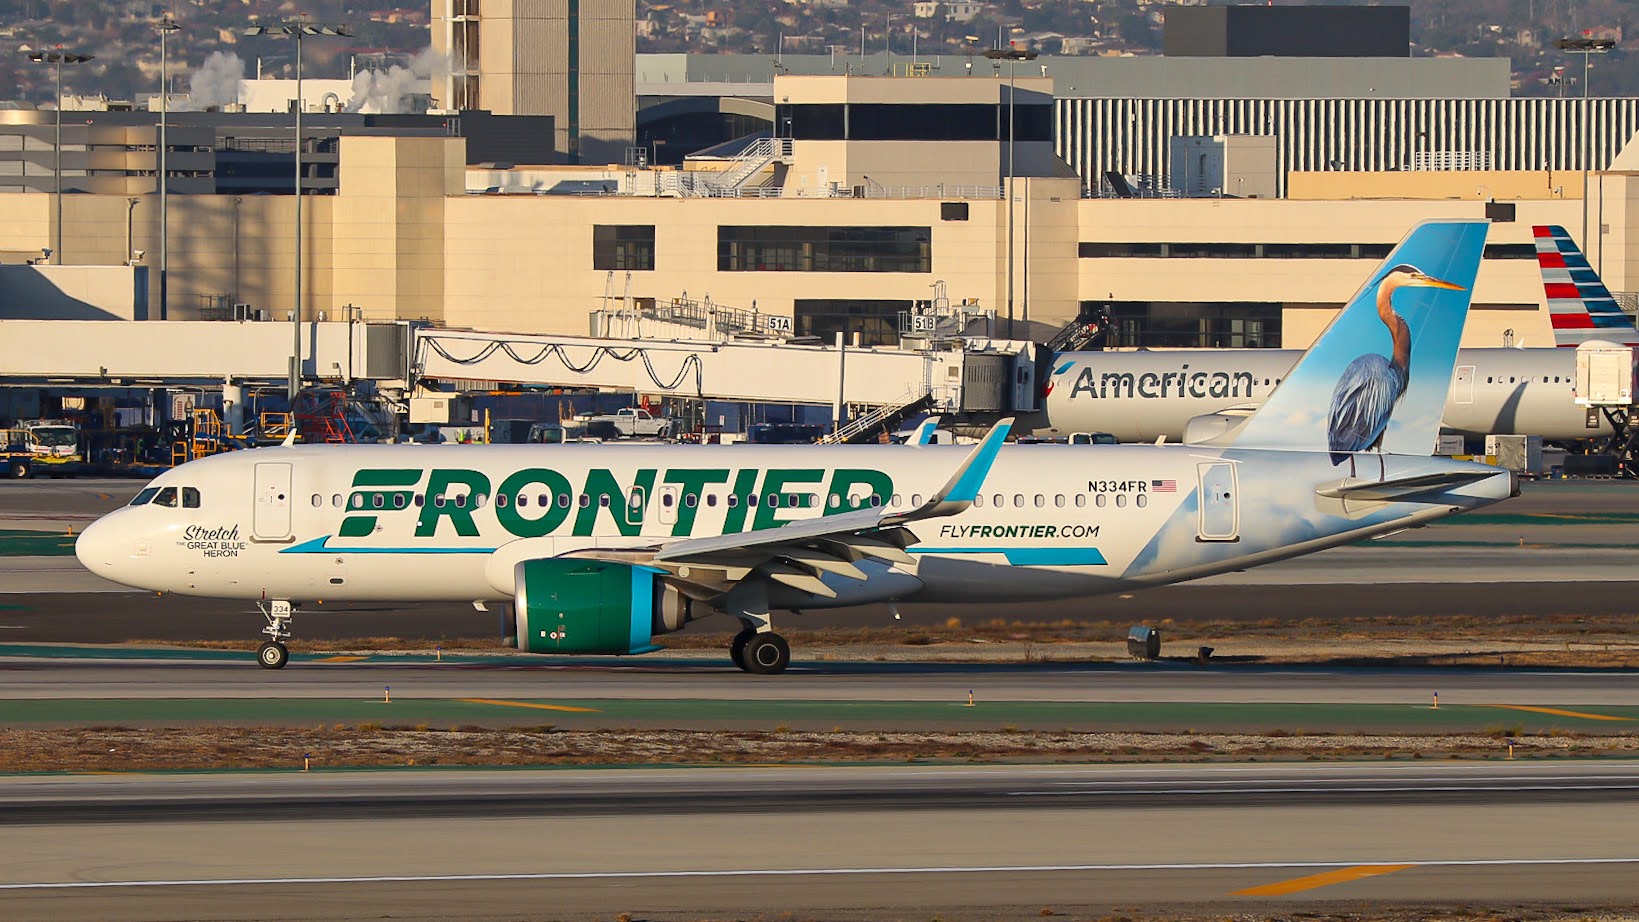 Photo of N334FR - Frontier Airlines Airbus A320neo at LAX